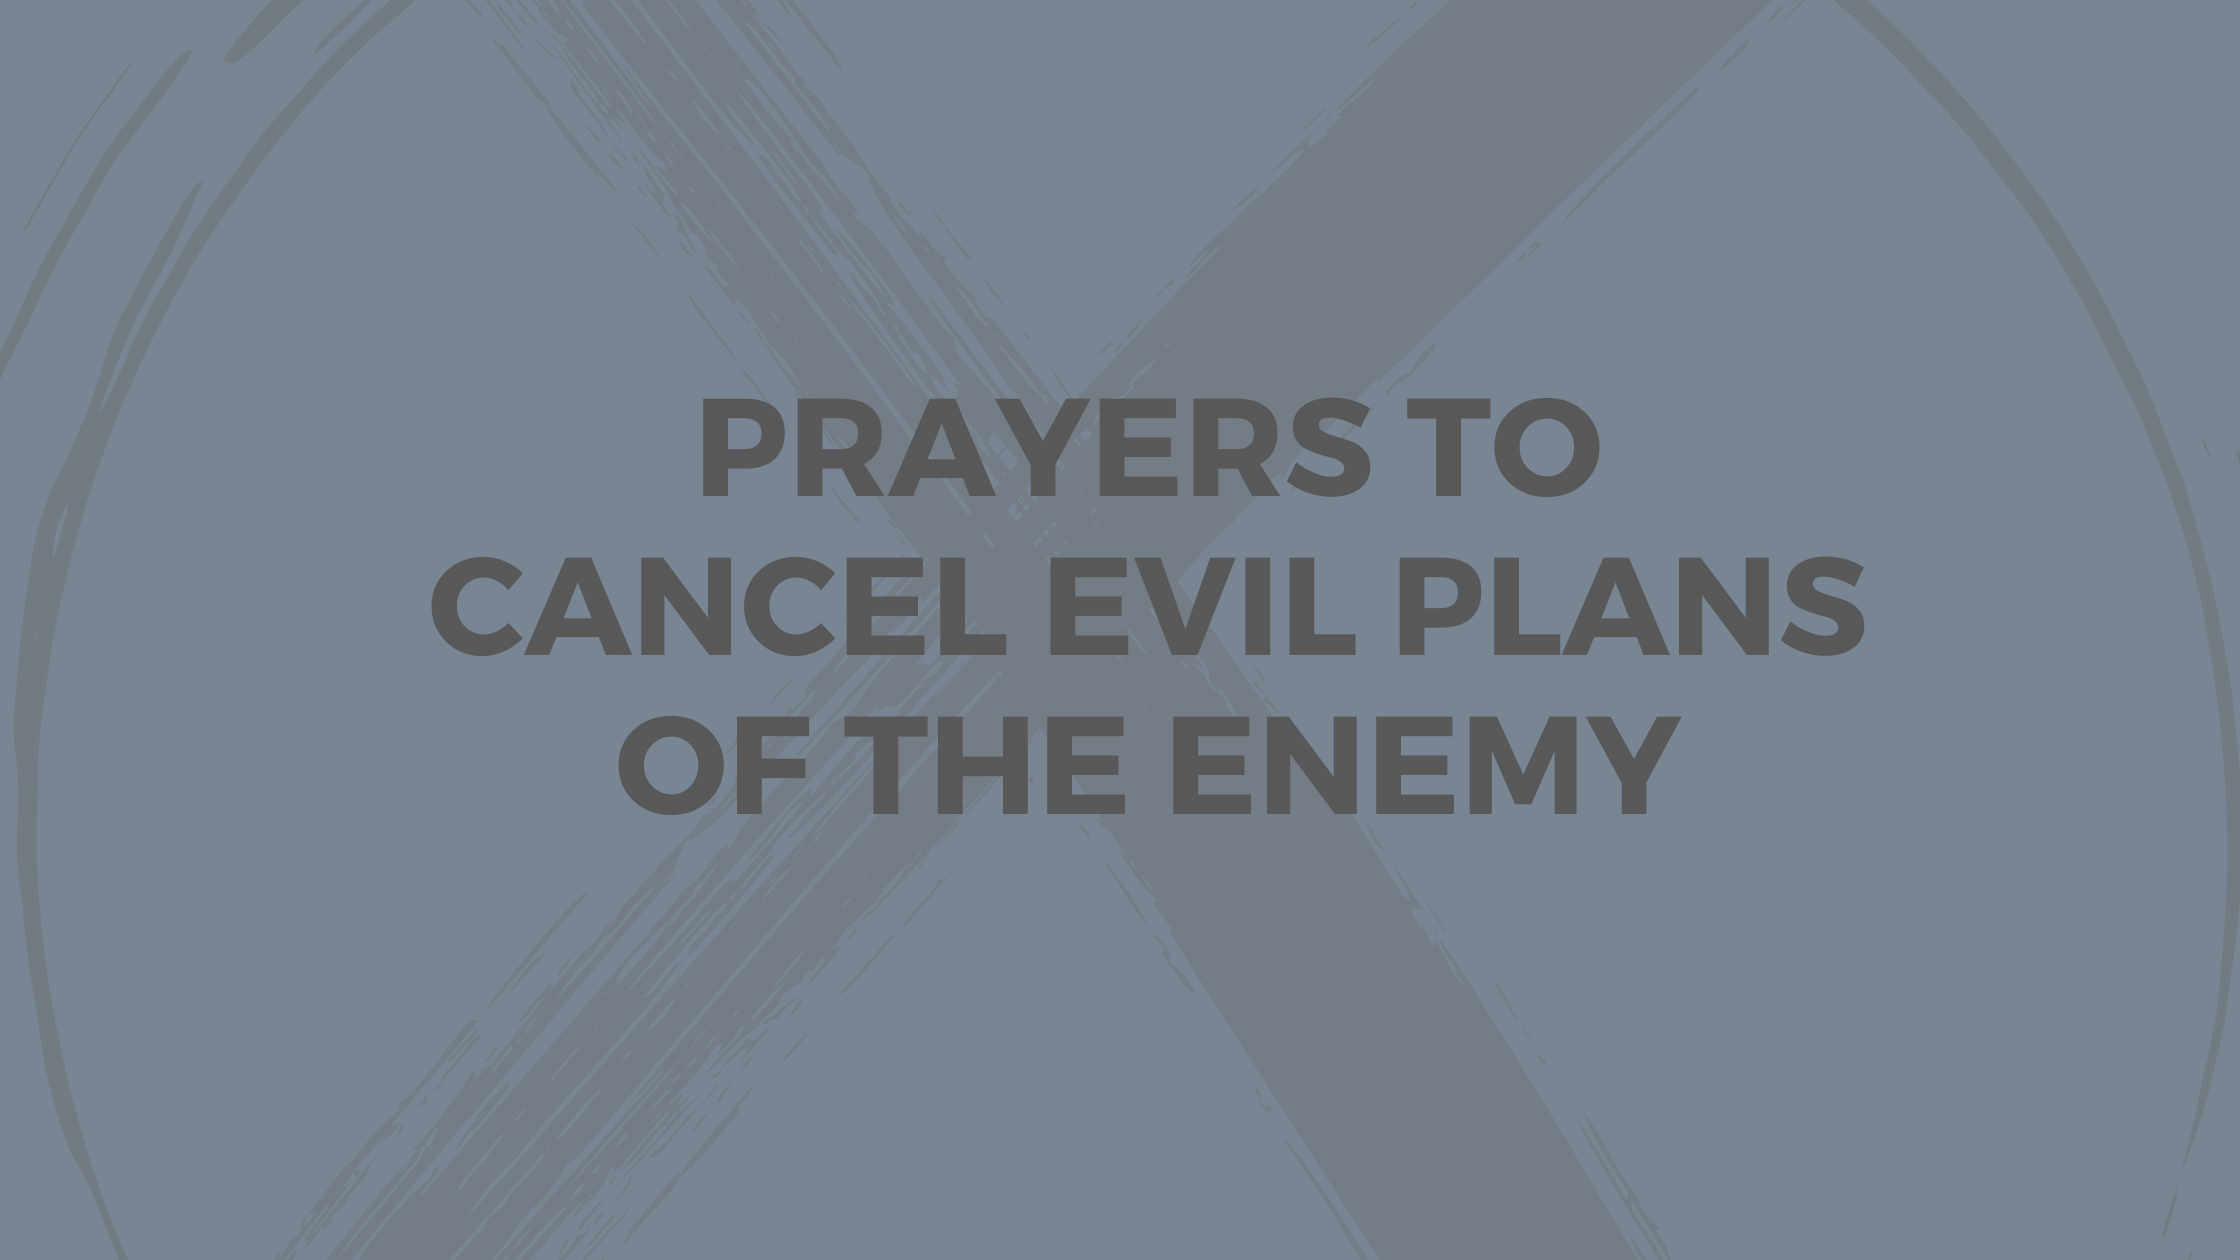 Prayers to Cancel Evil Plans of The Enemy